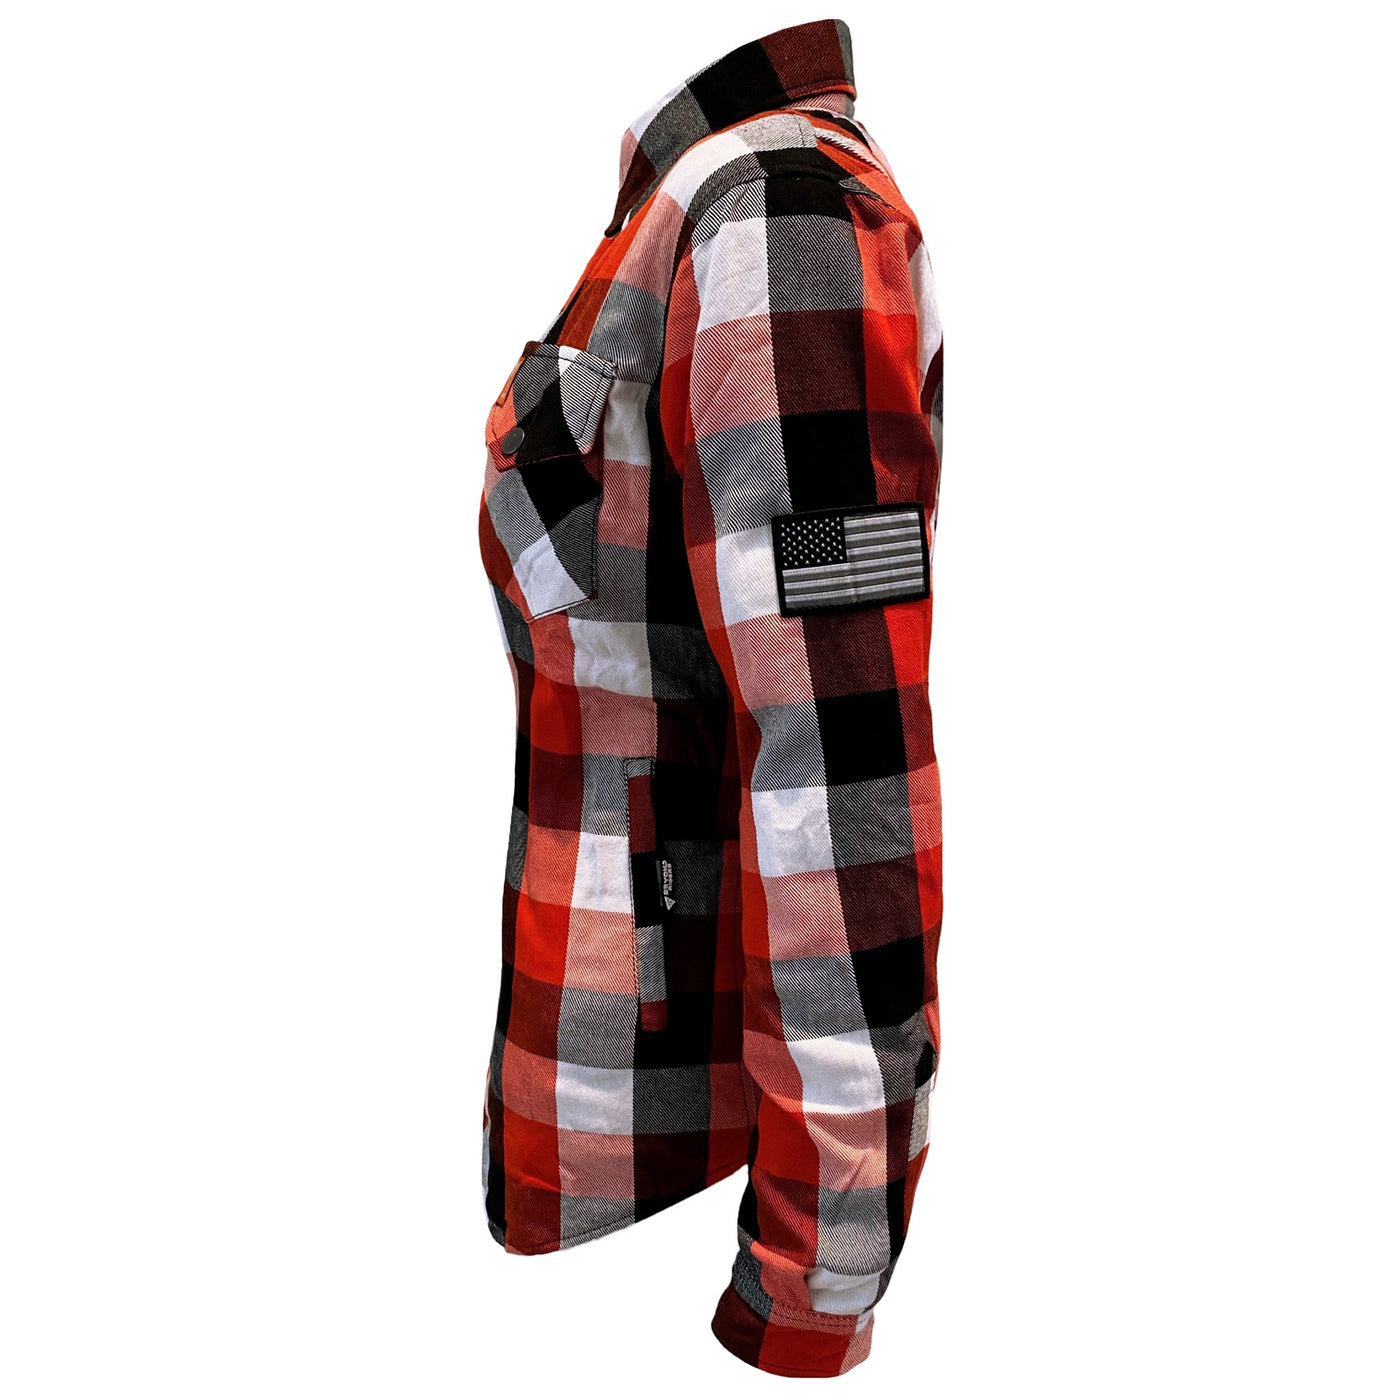 Protective Flannel Shirt with Pads for Women "American Dream" - Red, Black, White Checkered